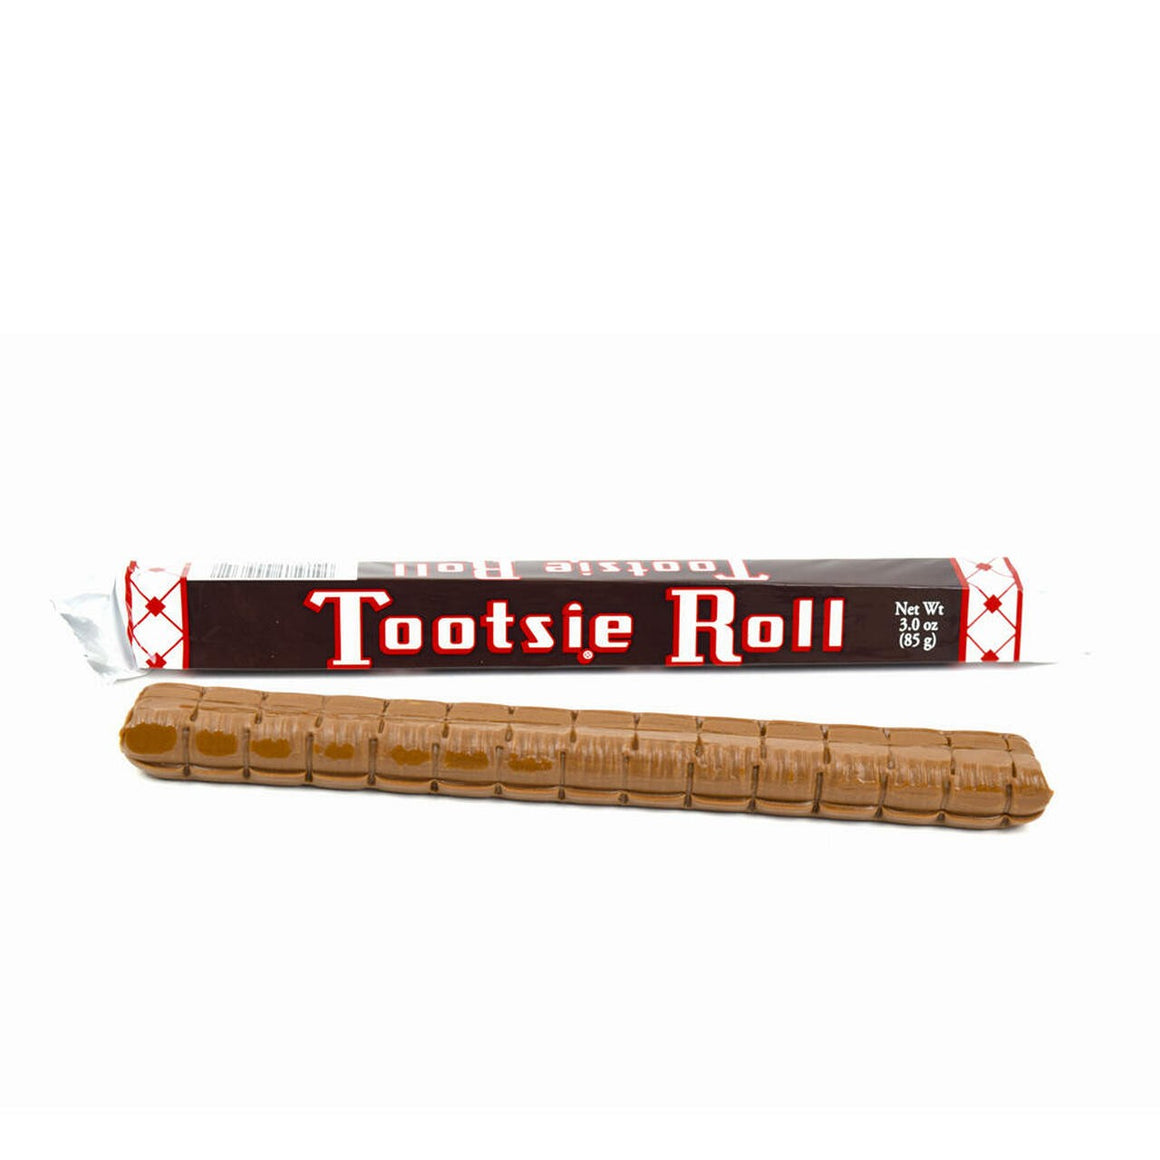 All City Candy Tootsie Roll Nostalgic 3 oz. Bar Case of 24 Chewy Tootsie Roll Industries For fresh candy and great service, visit www.allcitycandy.com